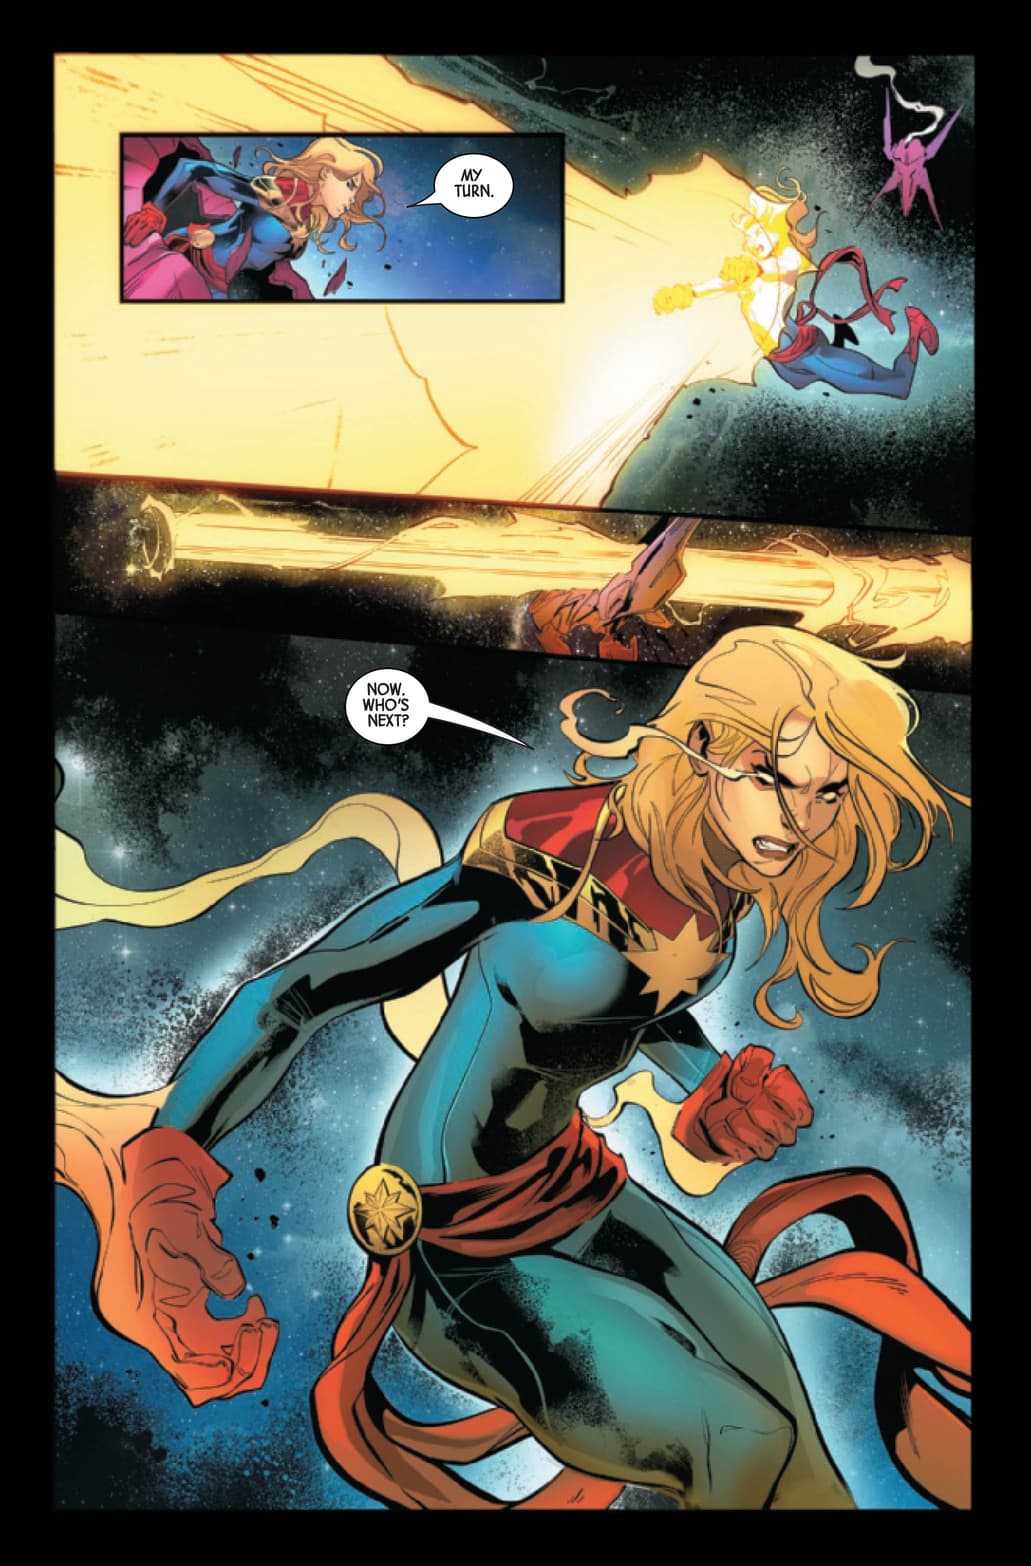 Captain Marvel: Braver and Mightier